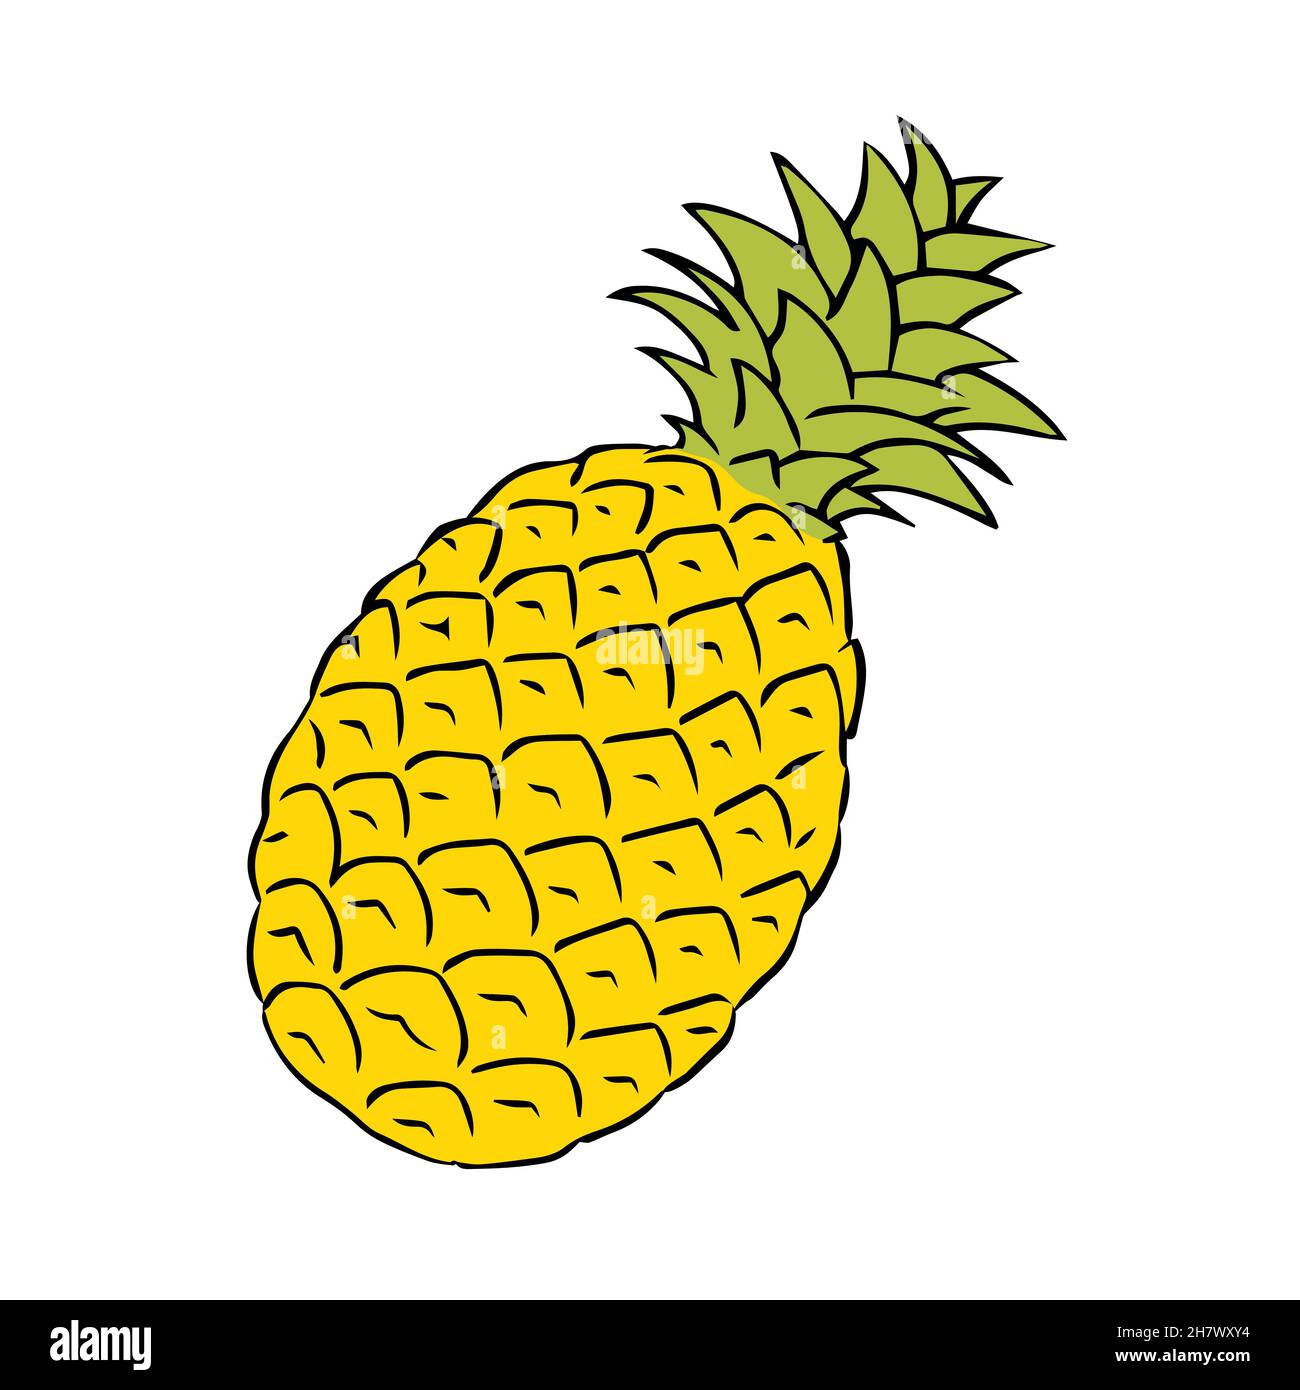 Ananas sketch illustration. Exotic delicious citrus fruit pineapple with vitamins. Vector freehand drawing. Isolated object on a white background Stock Vector